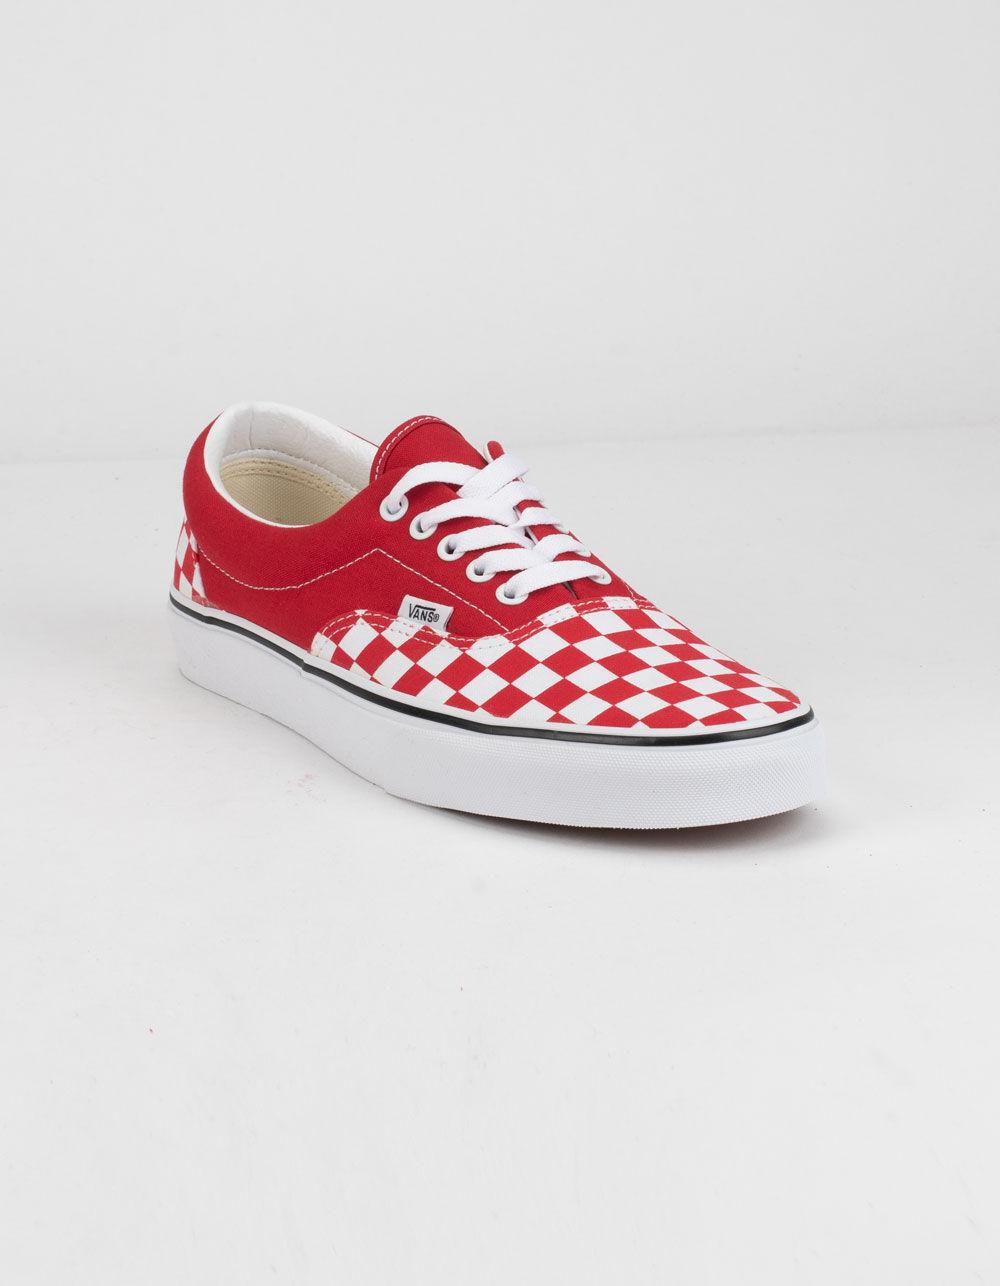 Vans Canvas Checkerboard Era Shoes in Racing Red (Red) for Men - Lyst